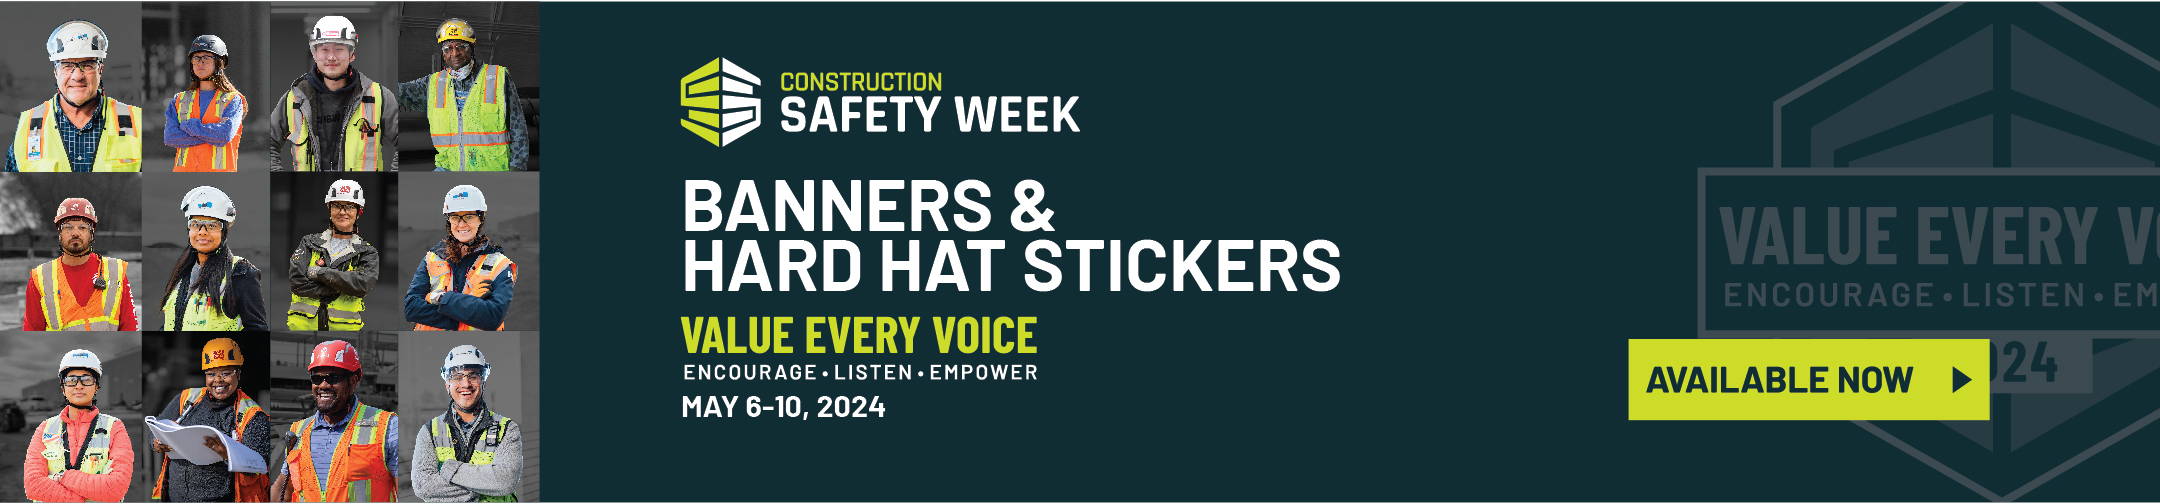 Construction Safety Week 2024 Hard Hat Stickers and Banners Homepage Banner